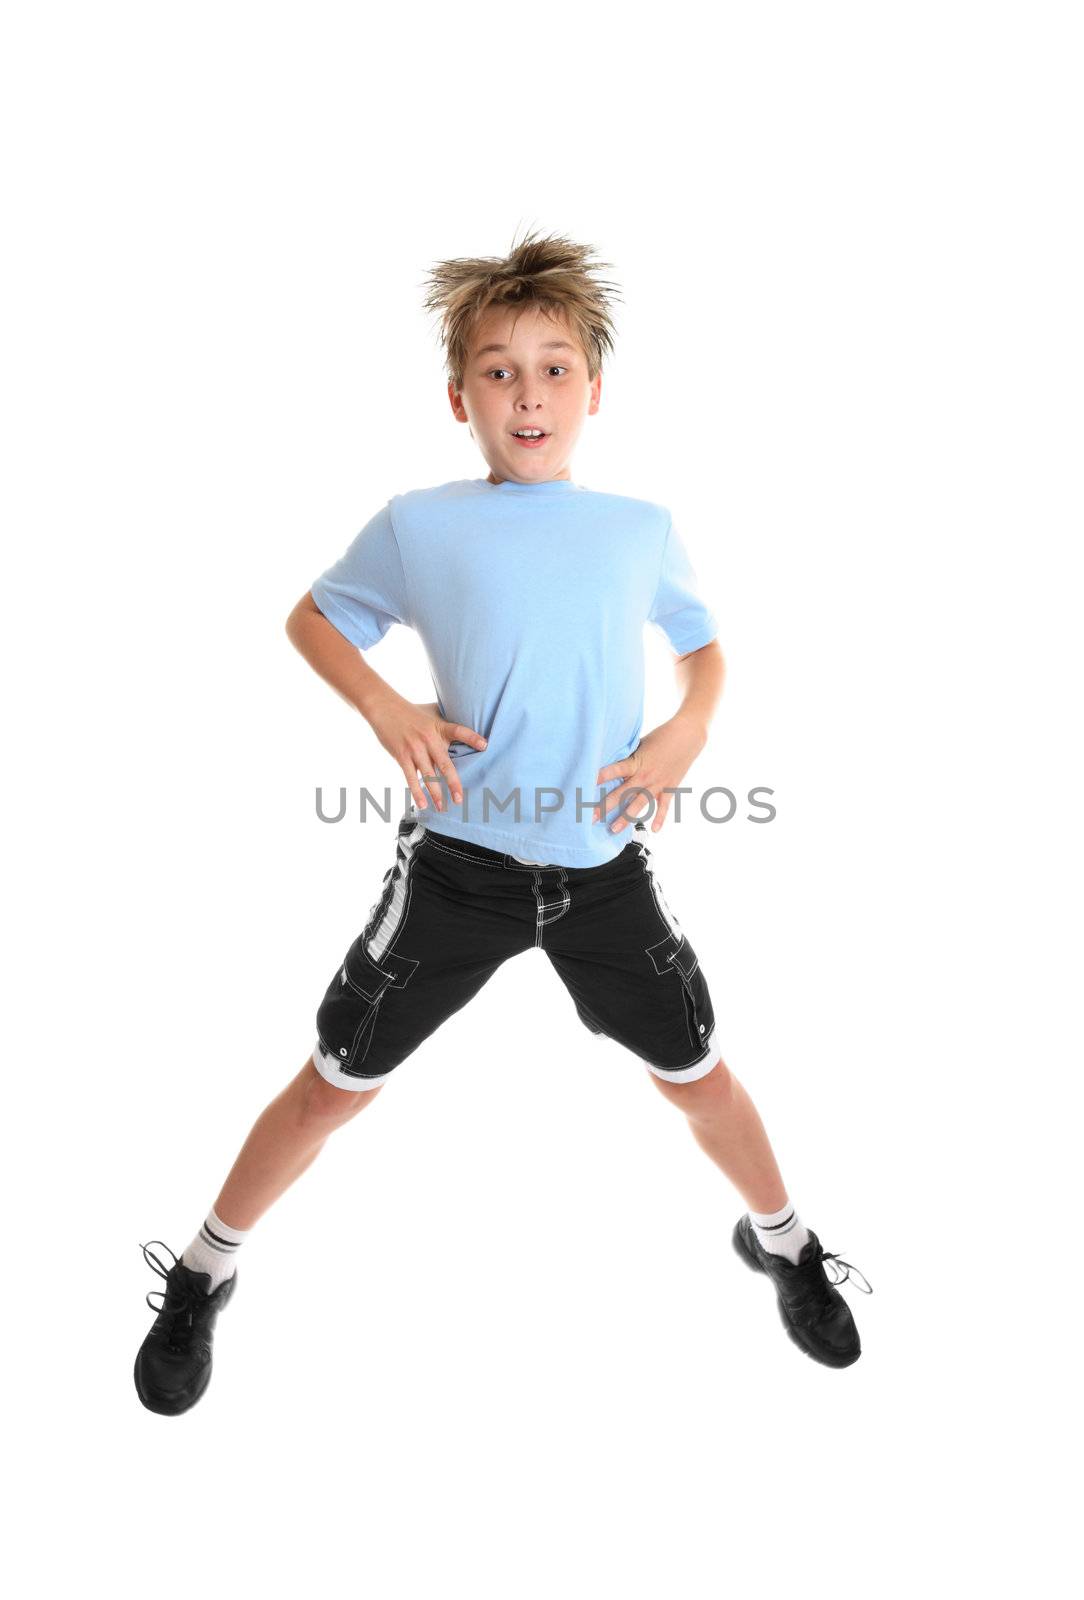 A boy doing fitness exercises on a white background.